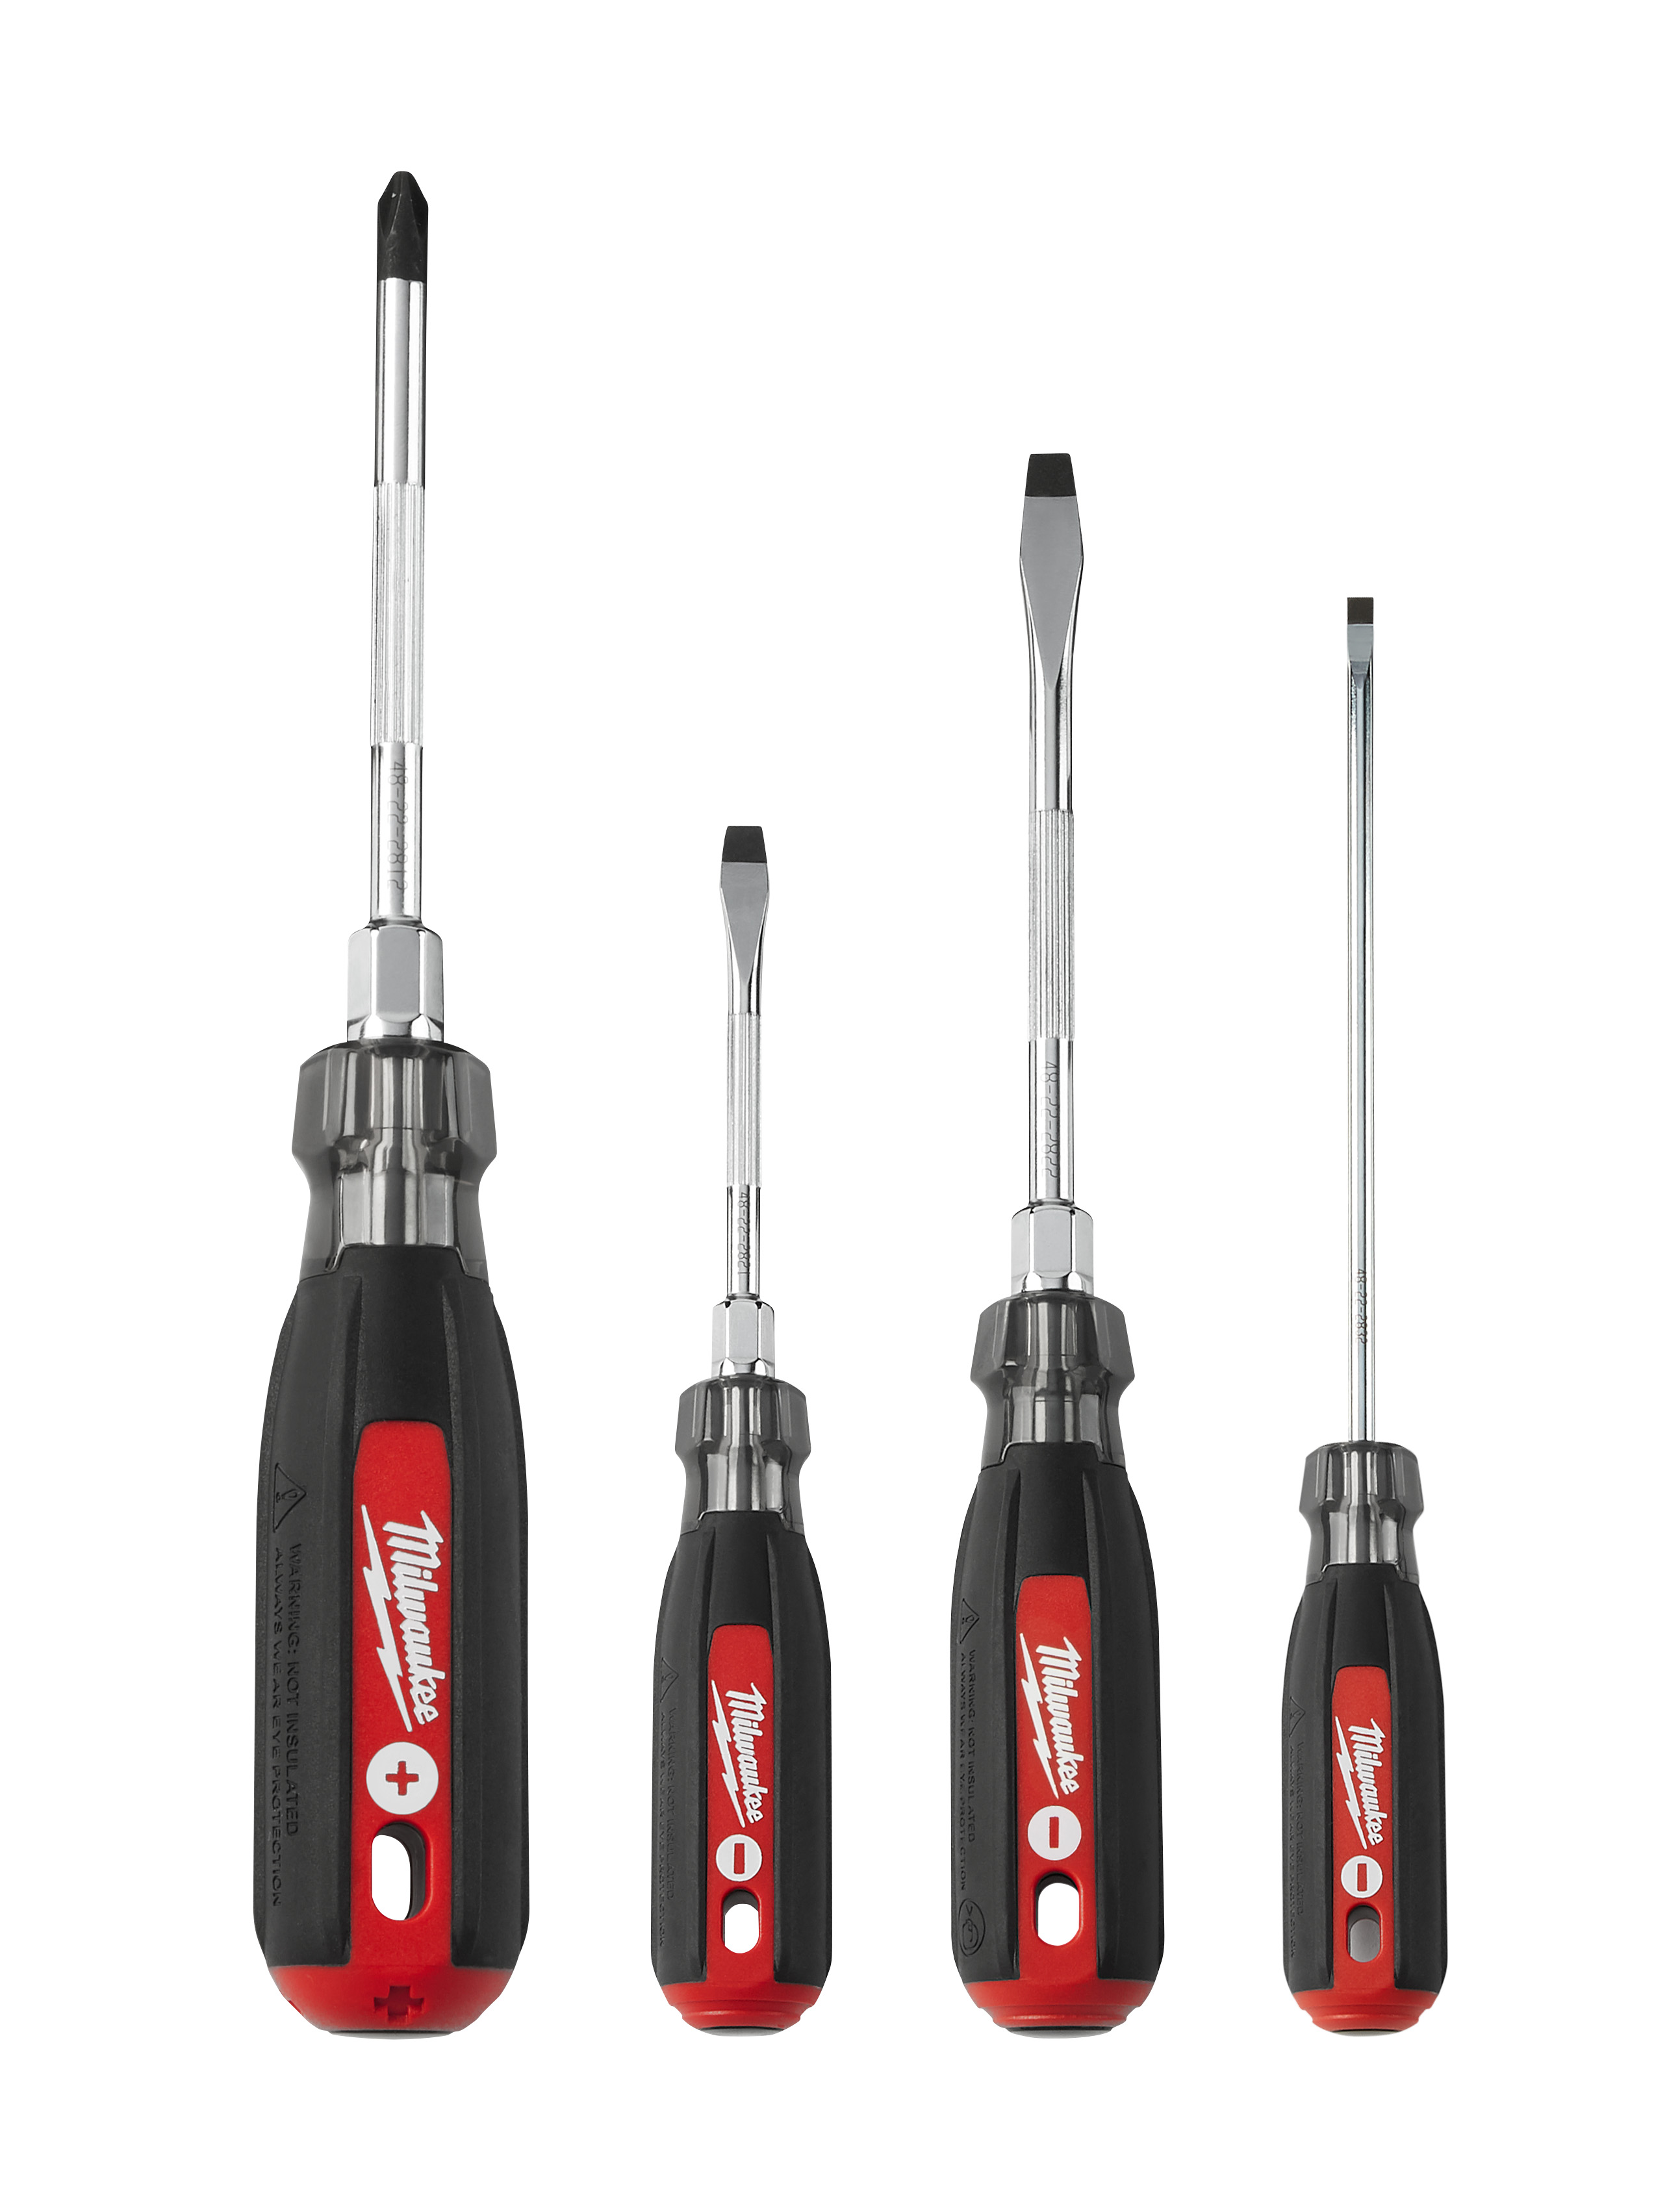 Featuring hardened tips & forged shanks the Milwaukee® 4 piece cushion grip screwdriver set provides professional grade solutions and durability to the user. The wrench-ready bolster and precision knurling offers users the features needed to increase efficiency and effectiveness. The durable handles feature an anti-peel design.